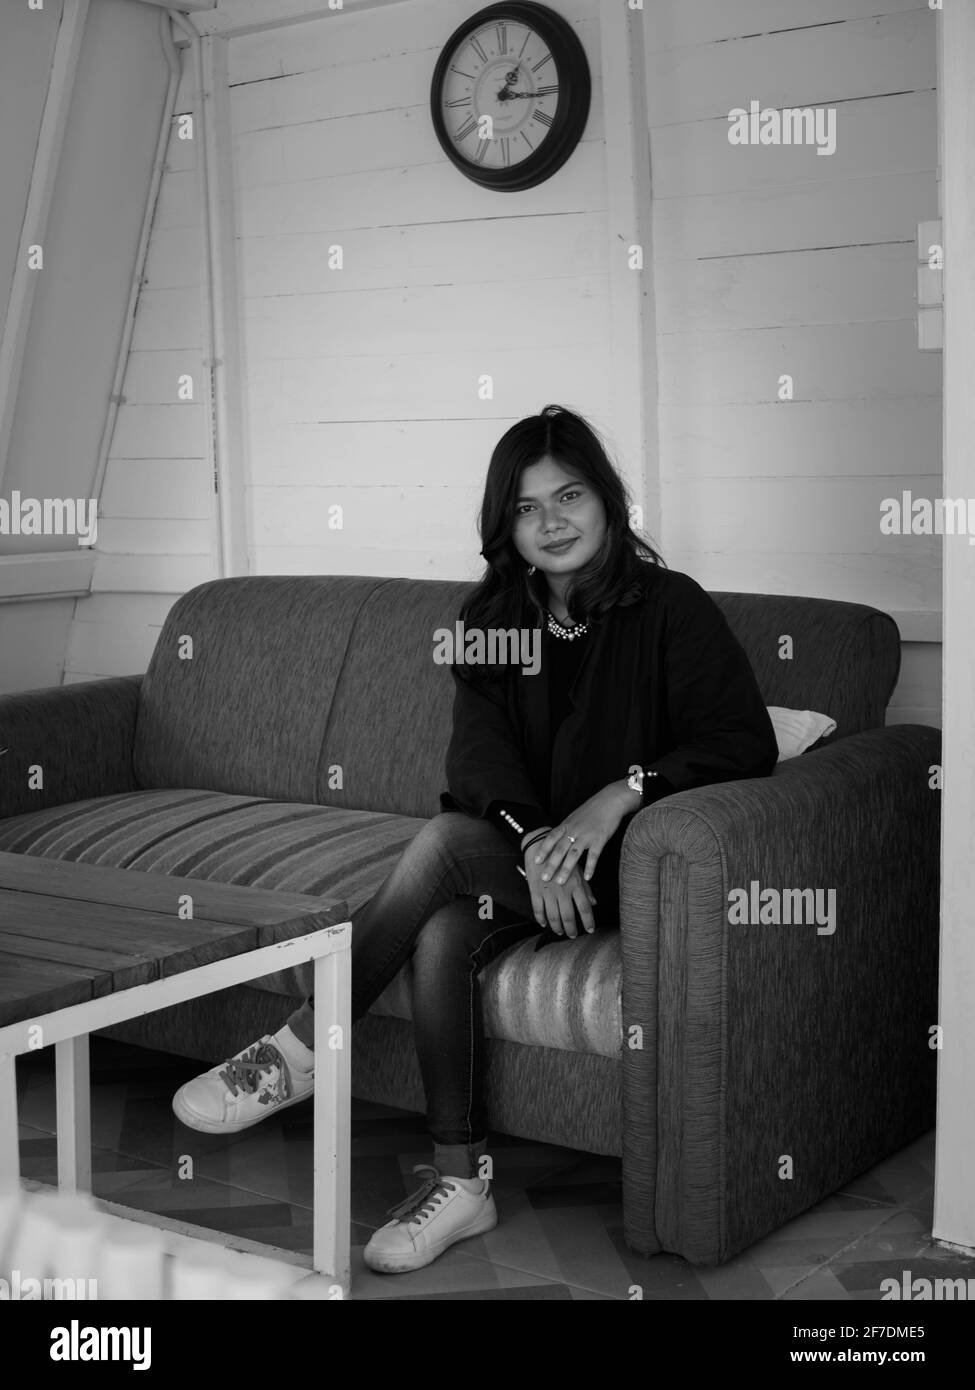 Black and White images of Indonesian Female Stock Photo